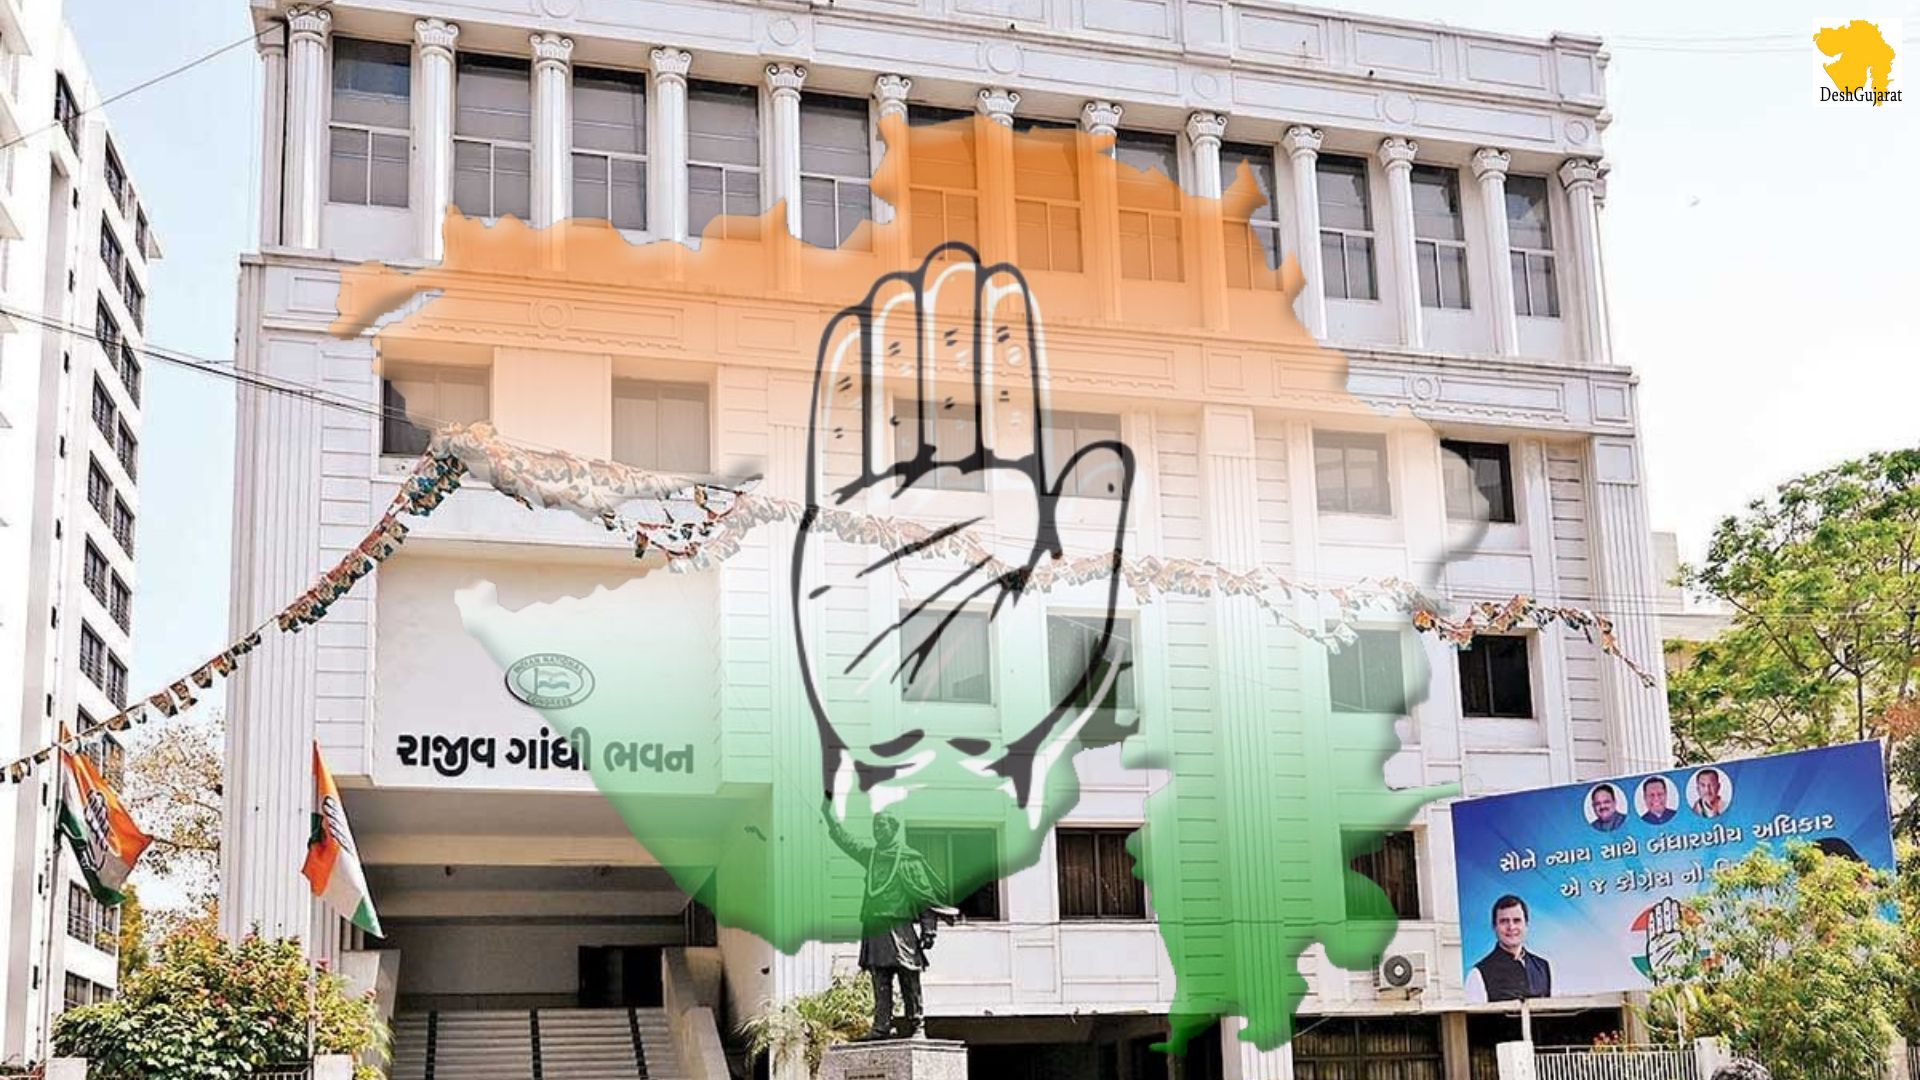 Gujarat Congress launches its election campaign and manifesto making programme